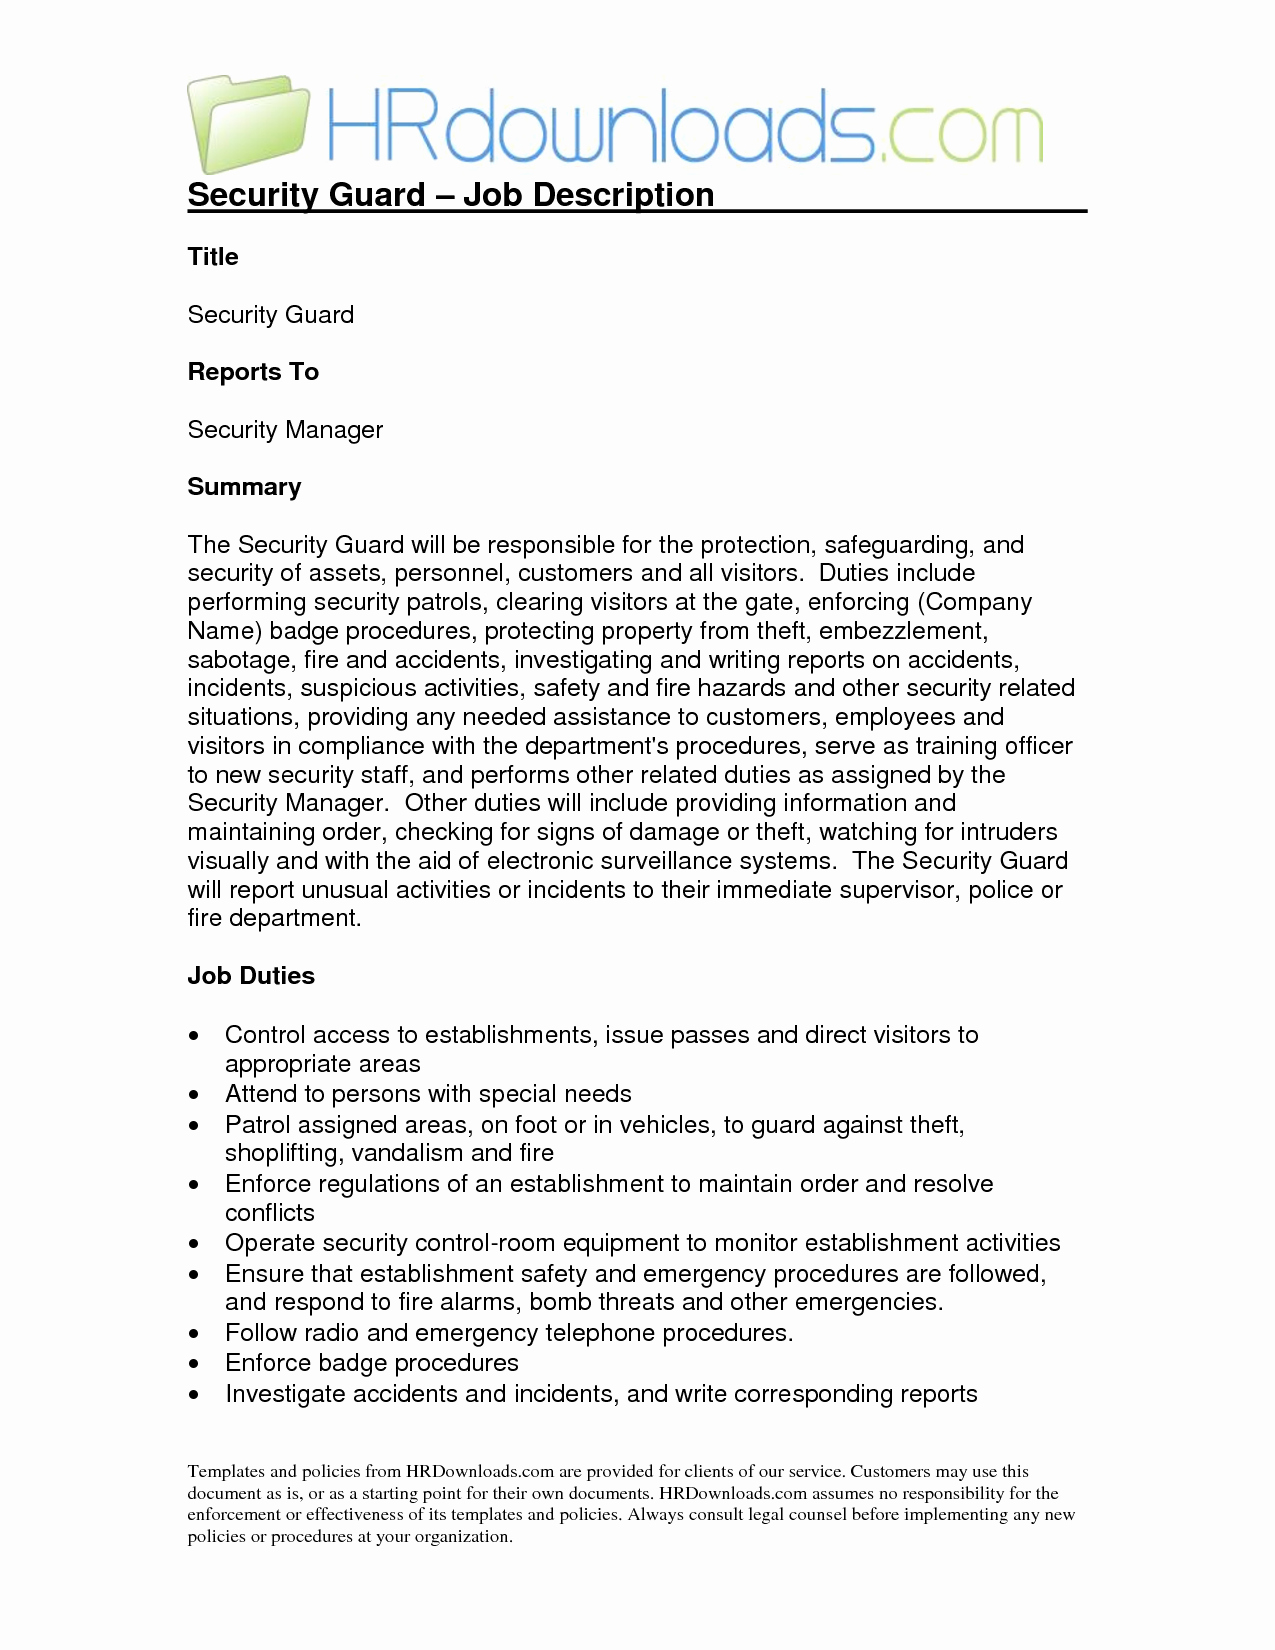 Security Guard Incident Report Template Elegant How to Write Security Ficer Incident Report Security